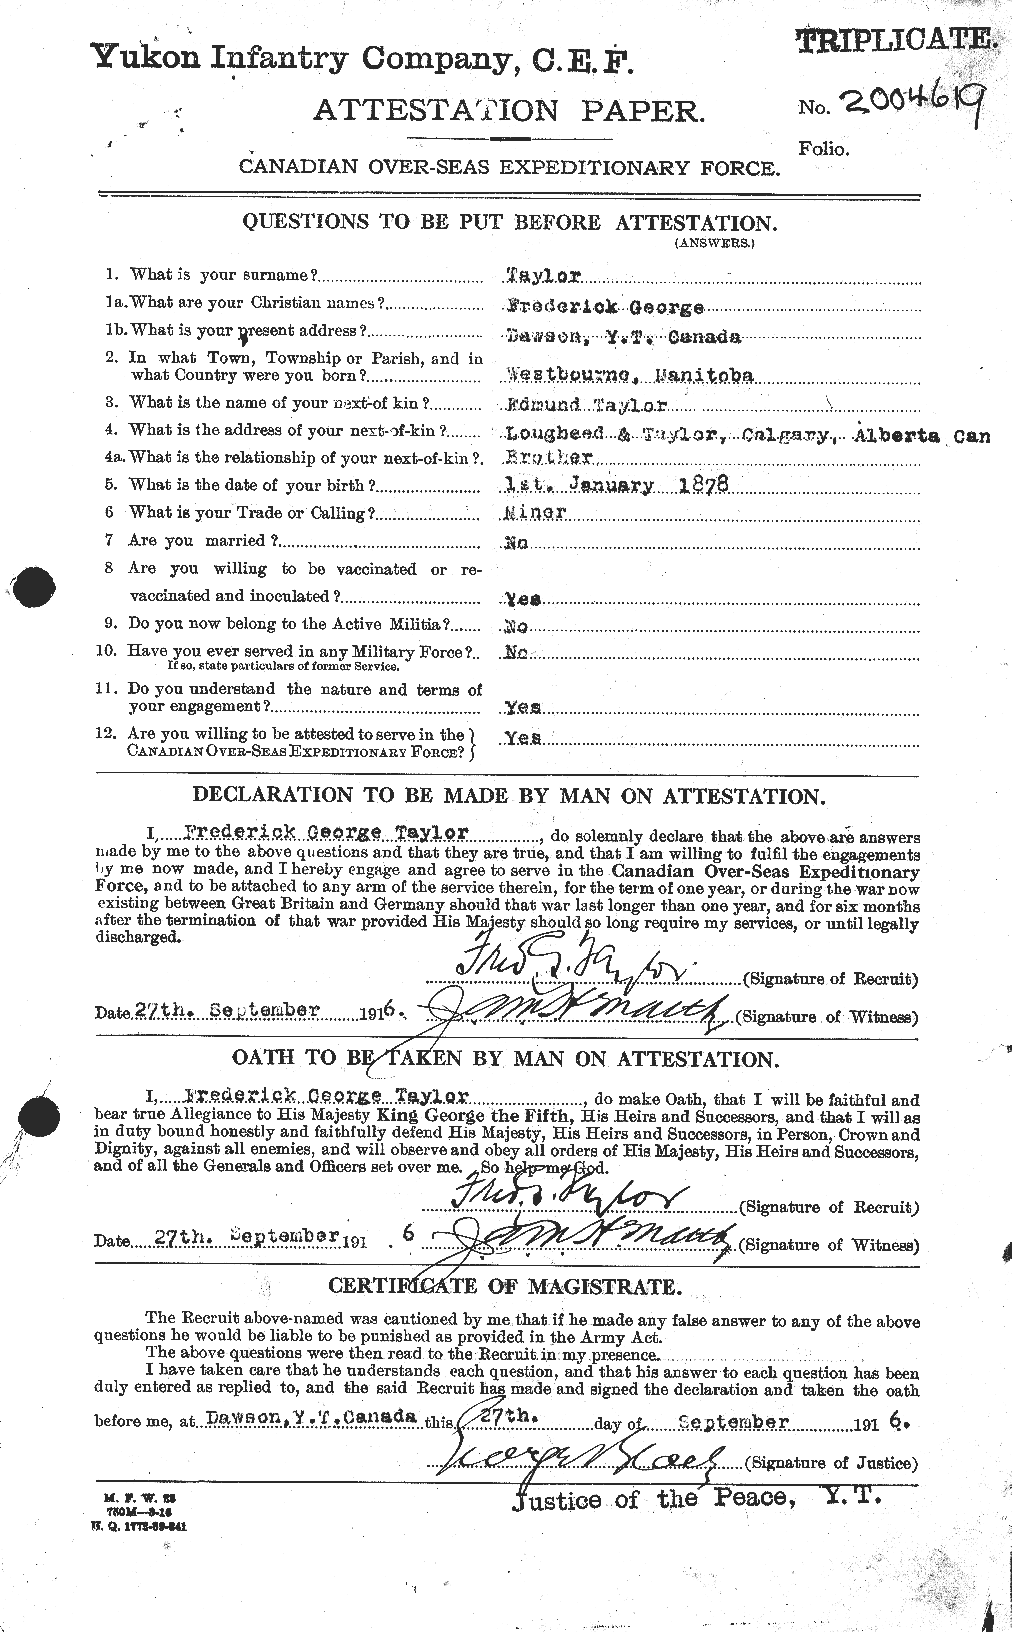 Personnel Records of the First World War - CEF 625803a